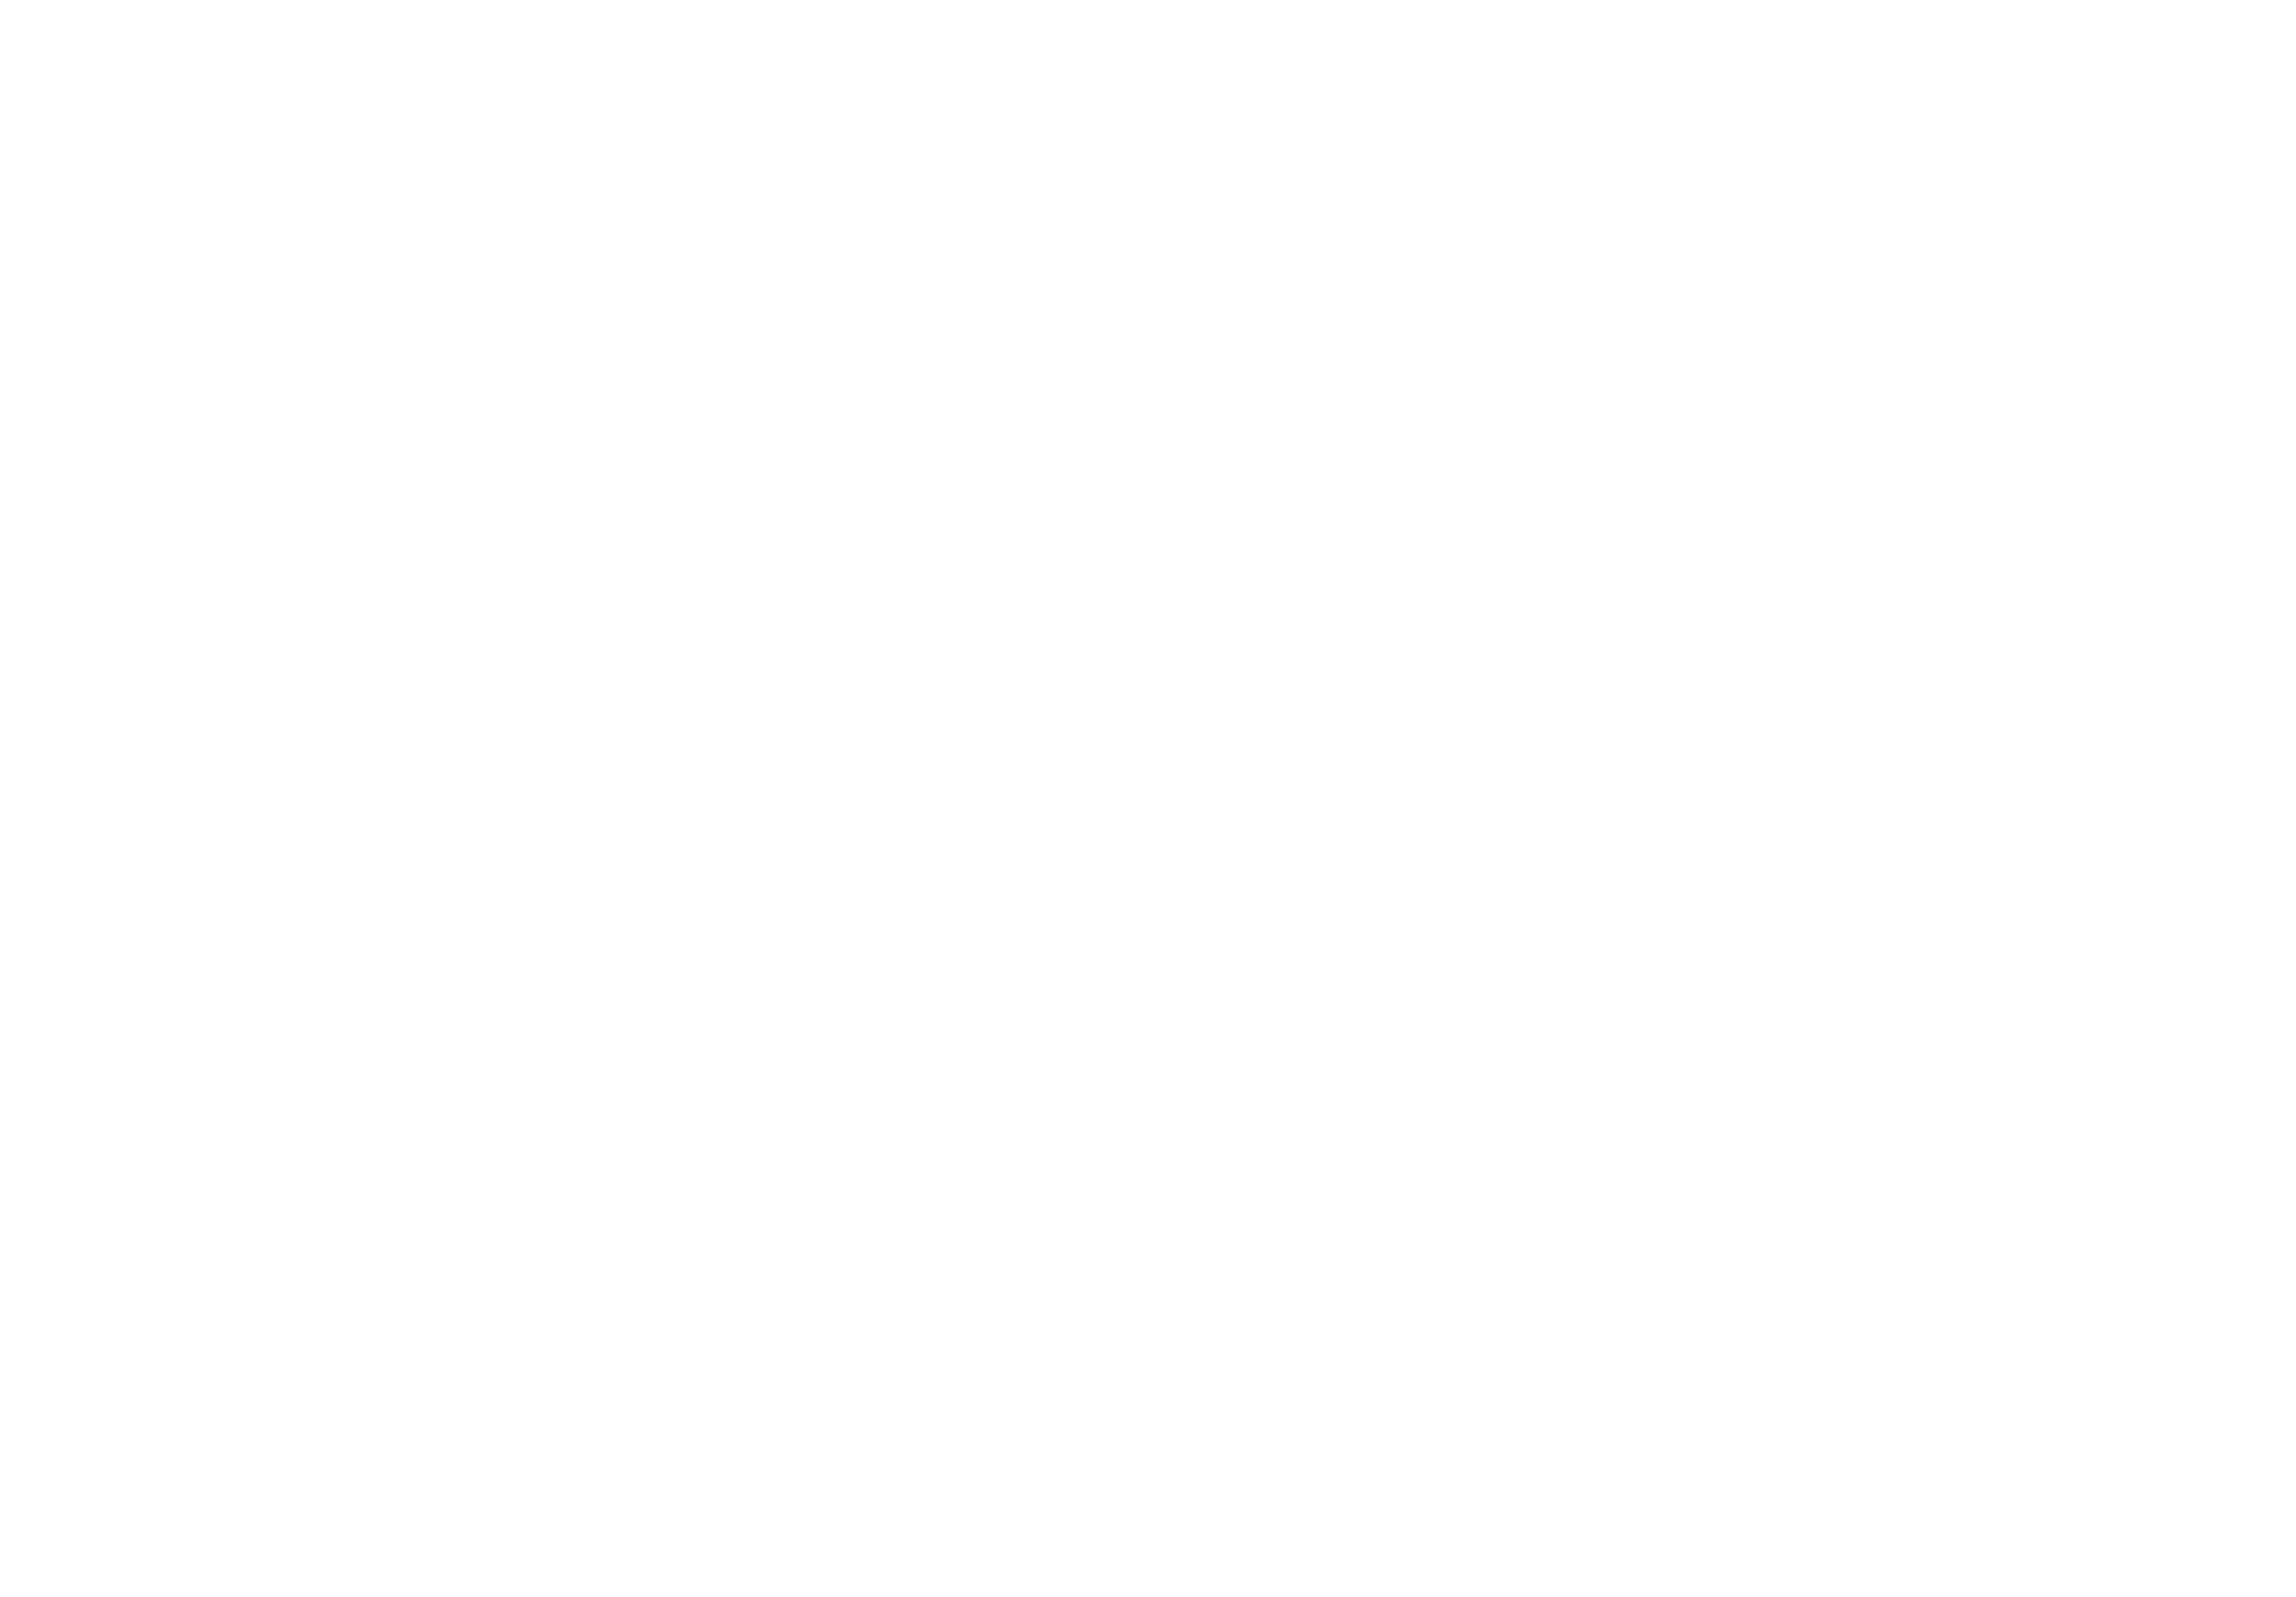 DEHV Candle Co.